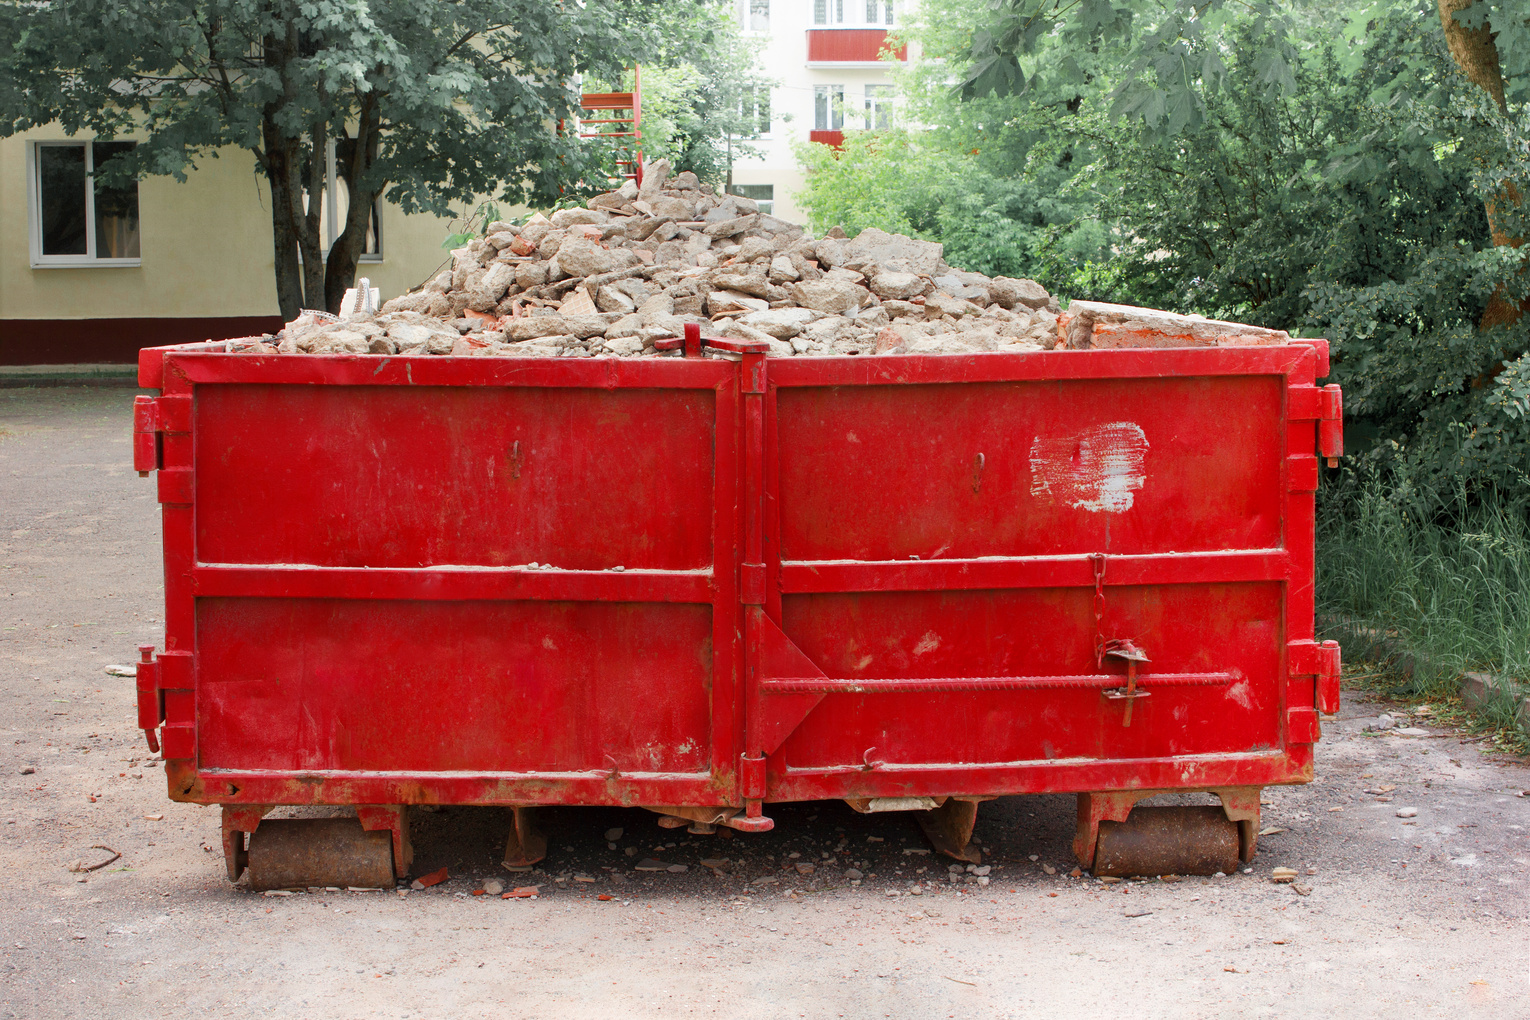 Red container with solid domestic and construction waste. Ca